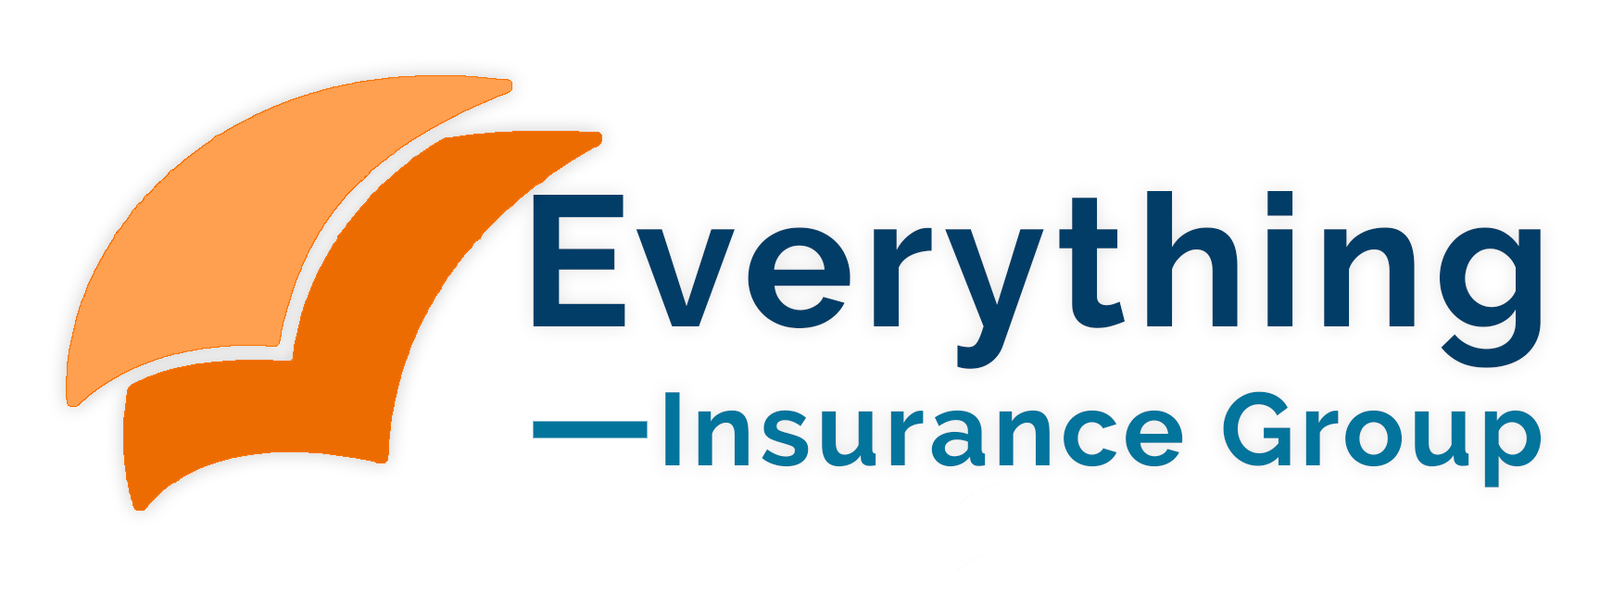 Everything Insurance Group